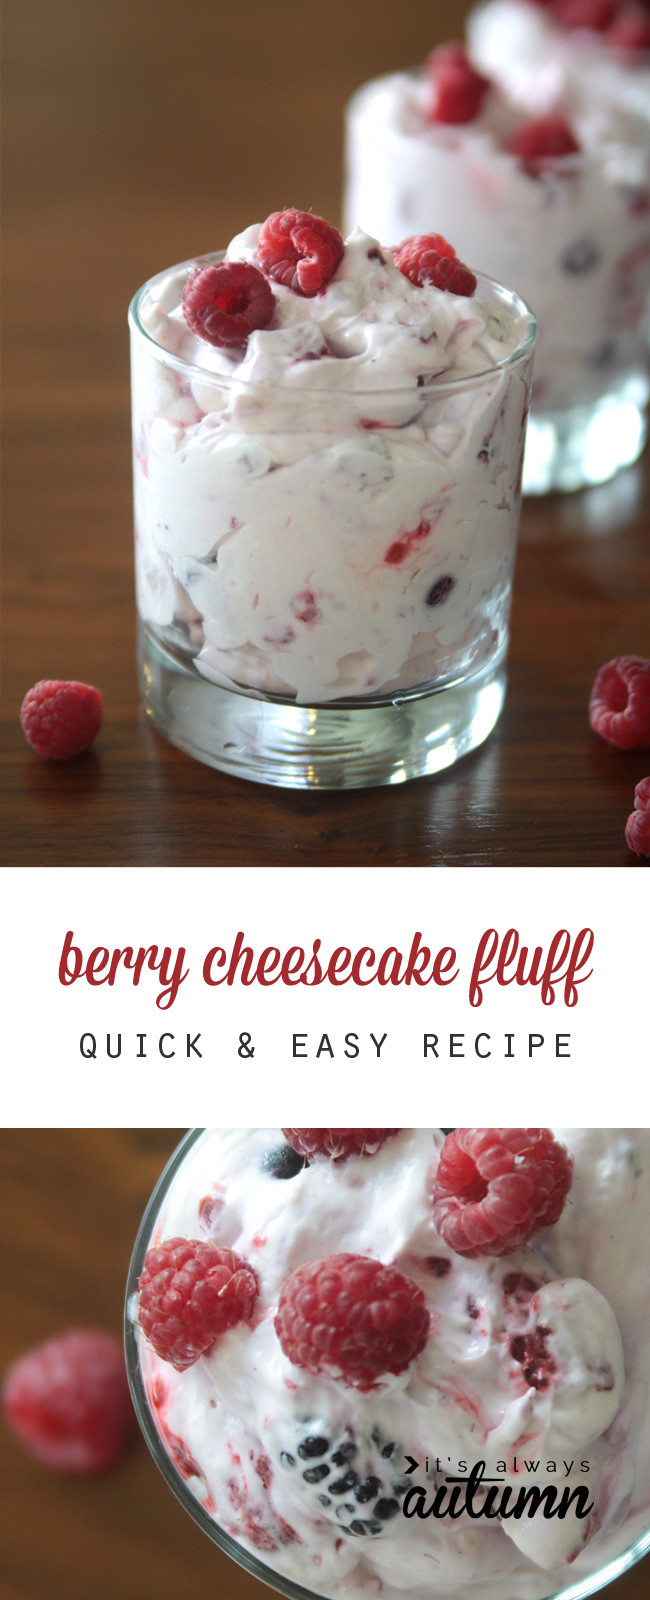 Quick Easy Healthy Desserts
 berry cheesecake fluff a lighter holiday dessert It s